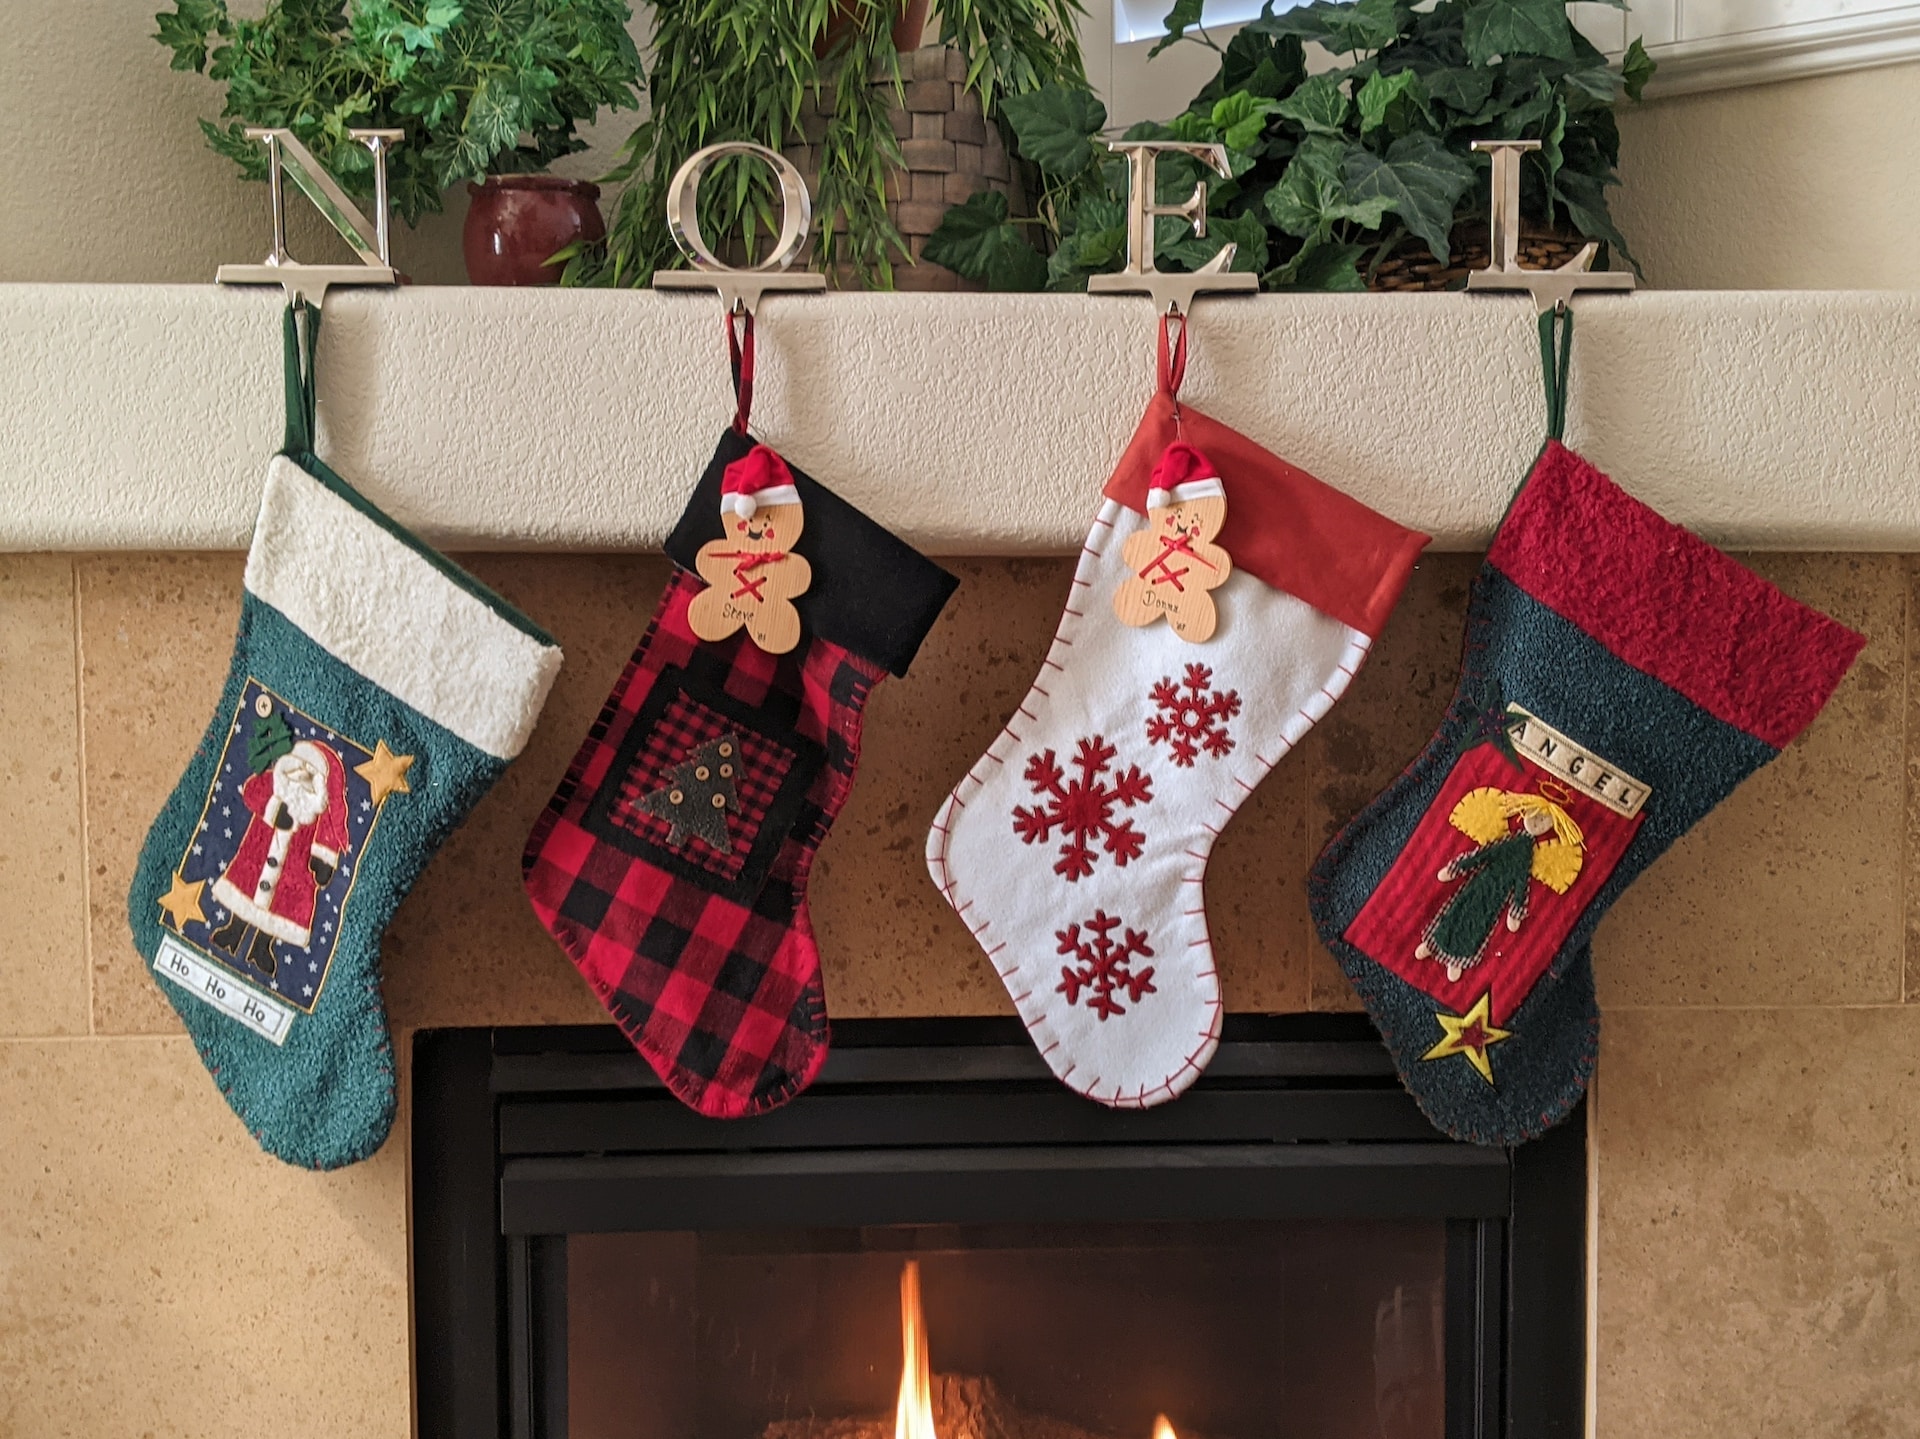 4 Stockings hung by the fireplace, underneath the word NOEL. 